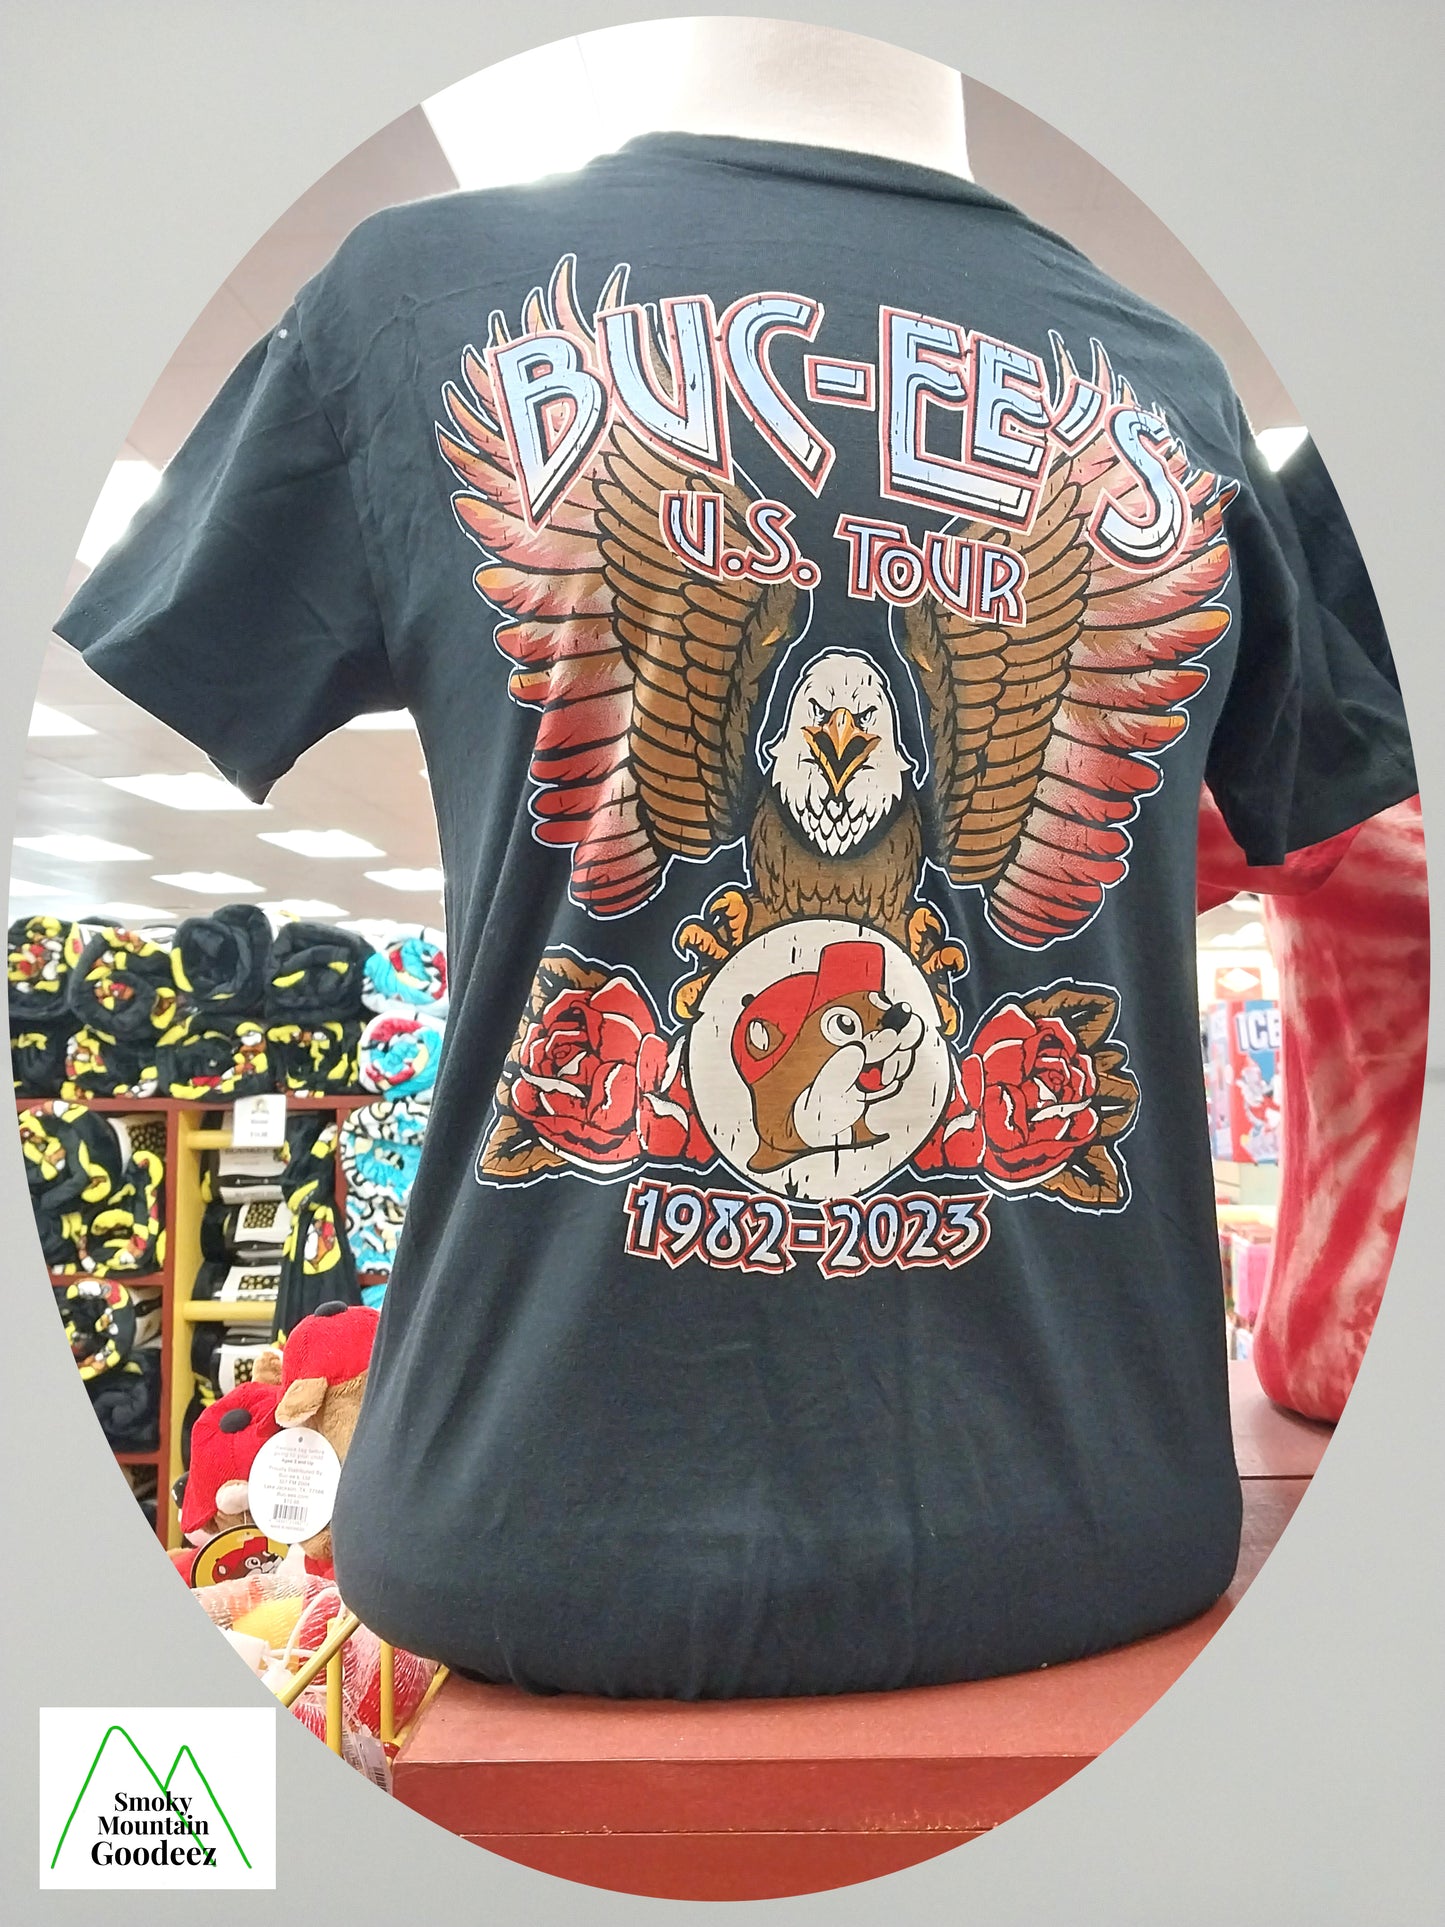 Buc-ee's Tour 1982 - 2023 Locations T-shirt